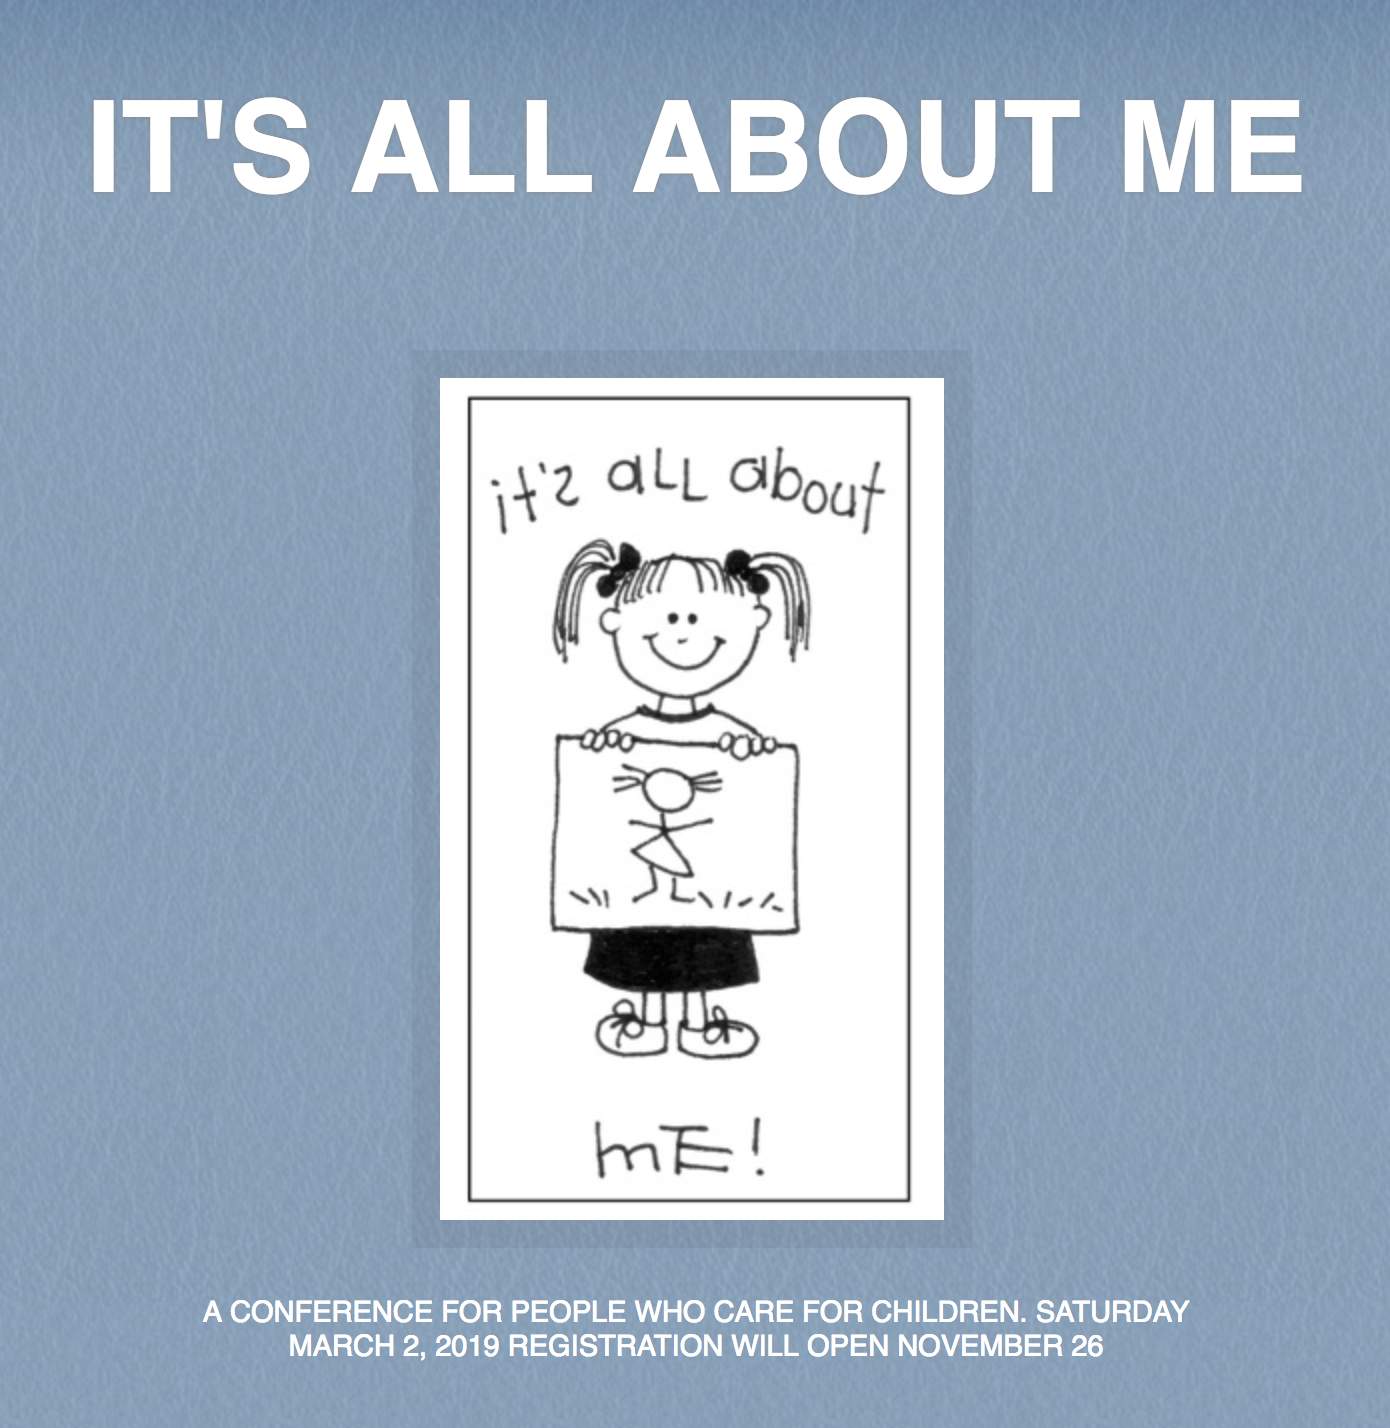 It's All About Me Conference March 2019